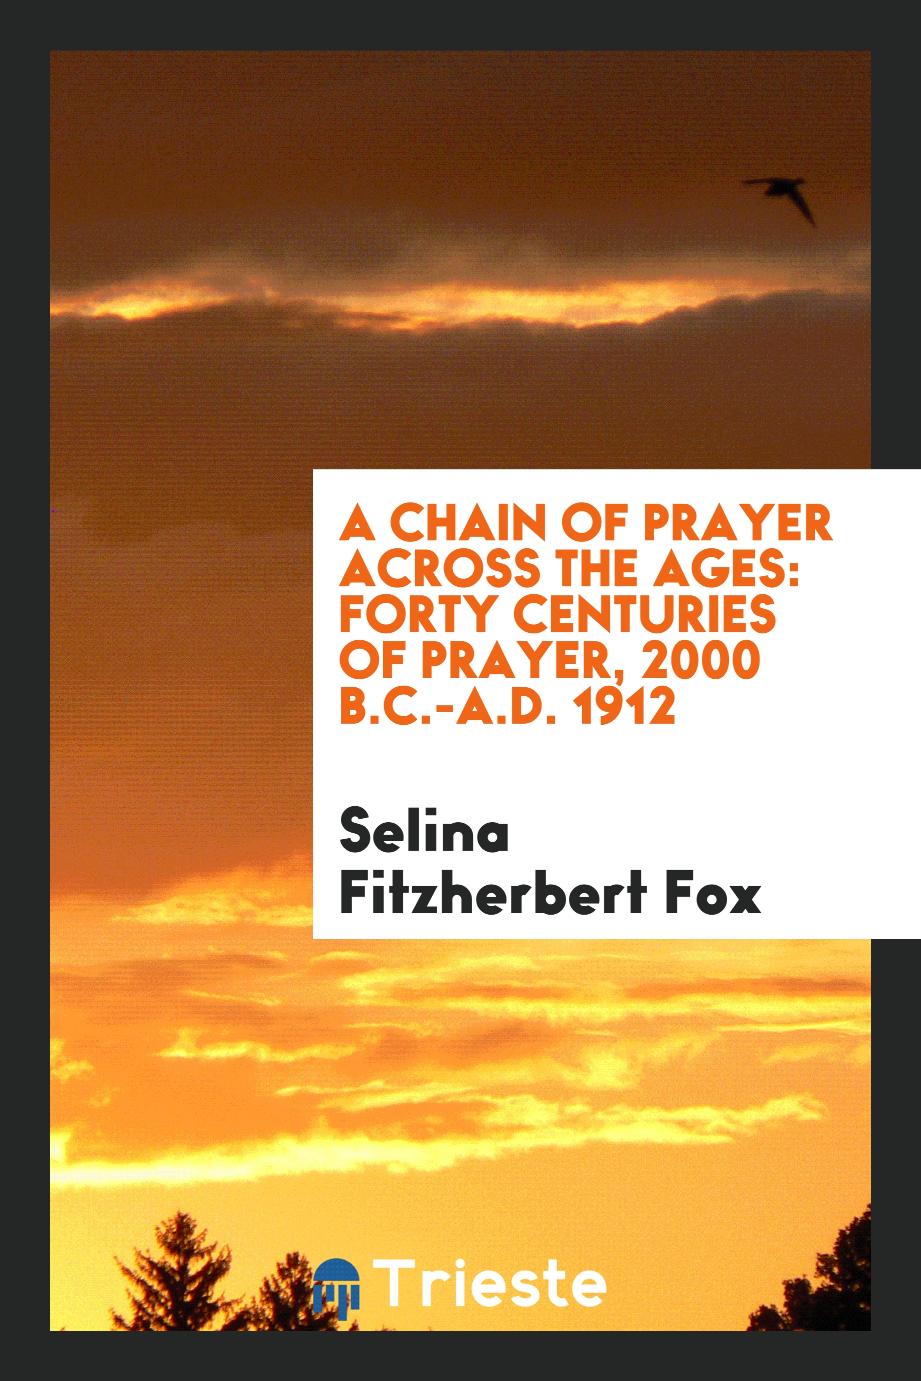 Selina Fitzherbert Fox - A chain of prayer across the ages: forty centuries of prayer, 2000 B.C.-A.D. 1912